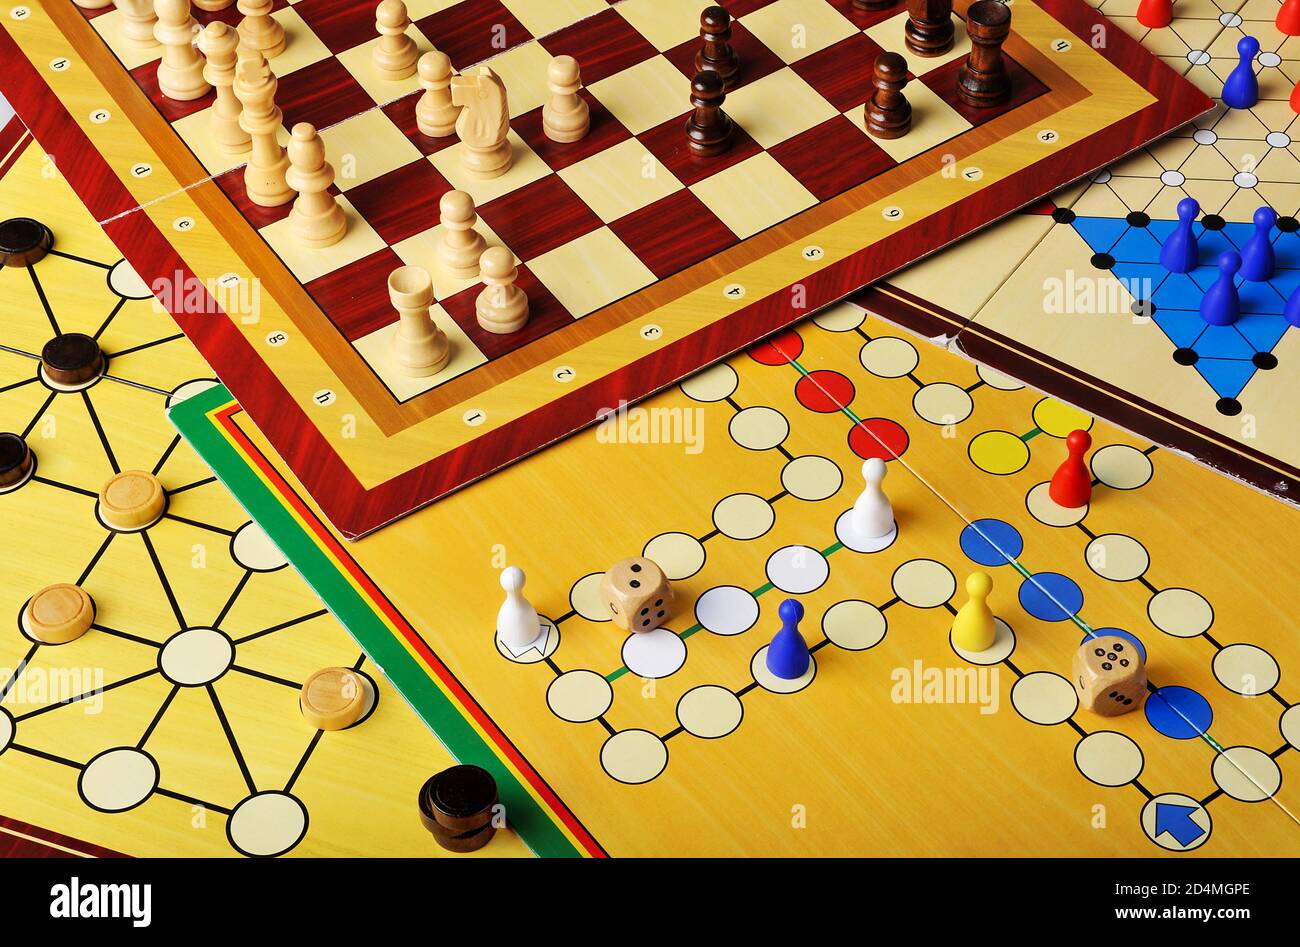 Chess Pro 3D - Play Game for Free - GameTop